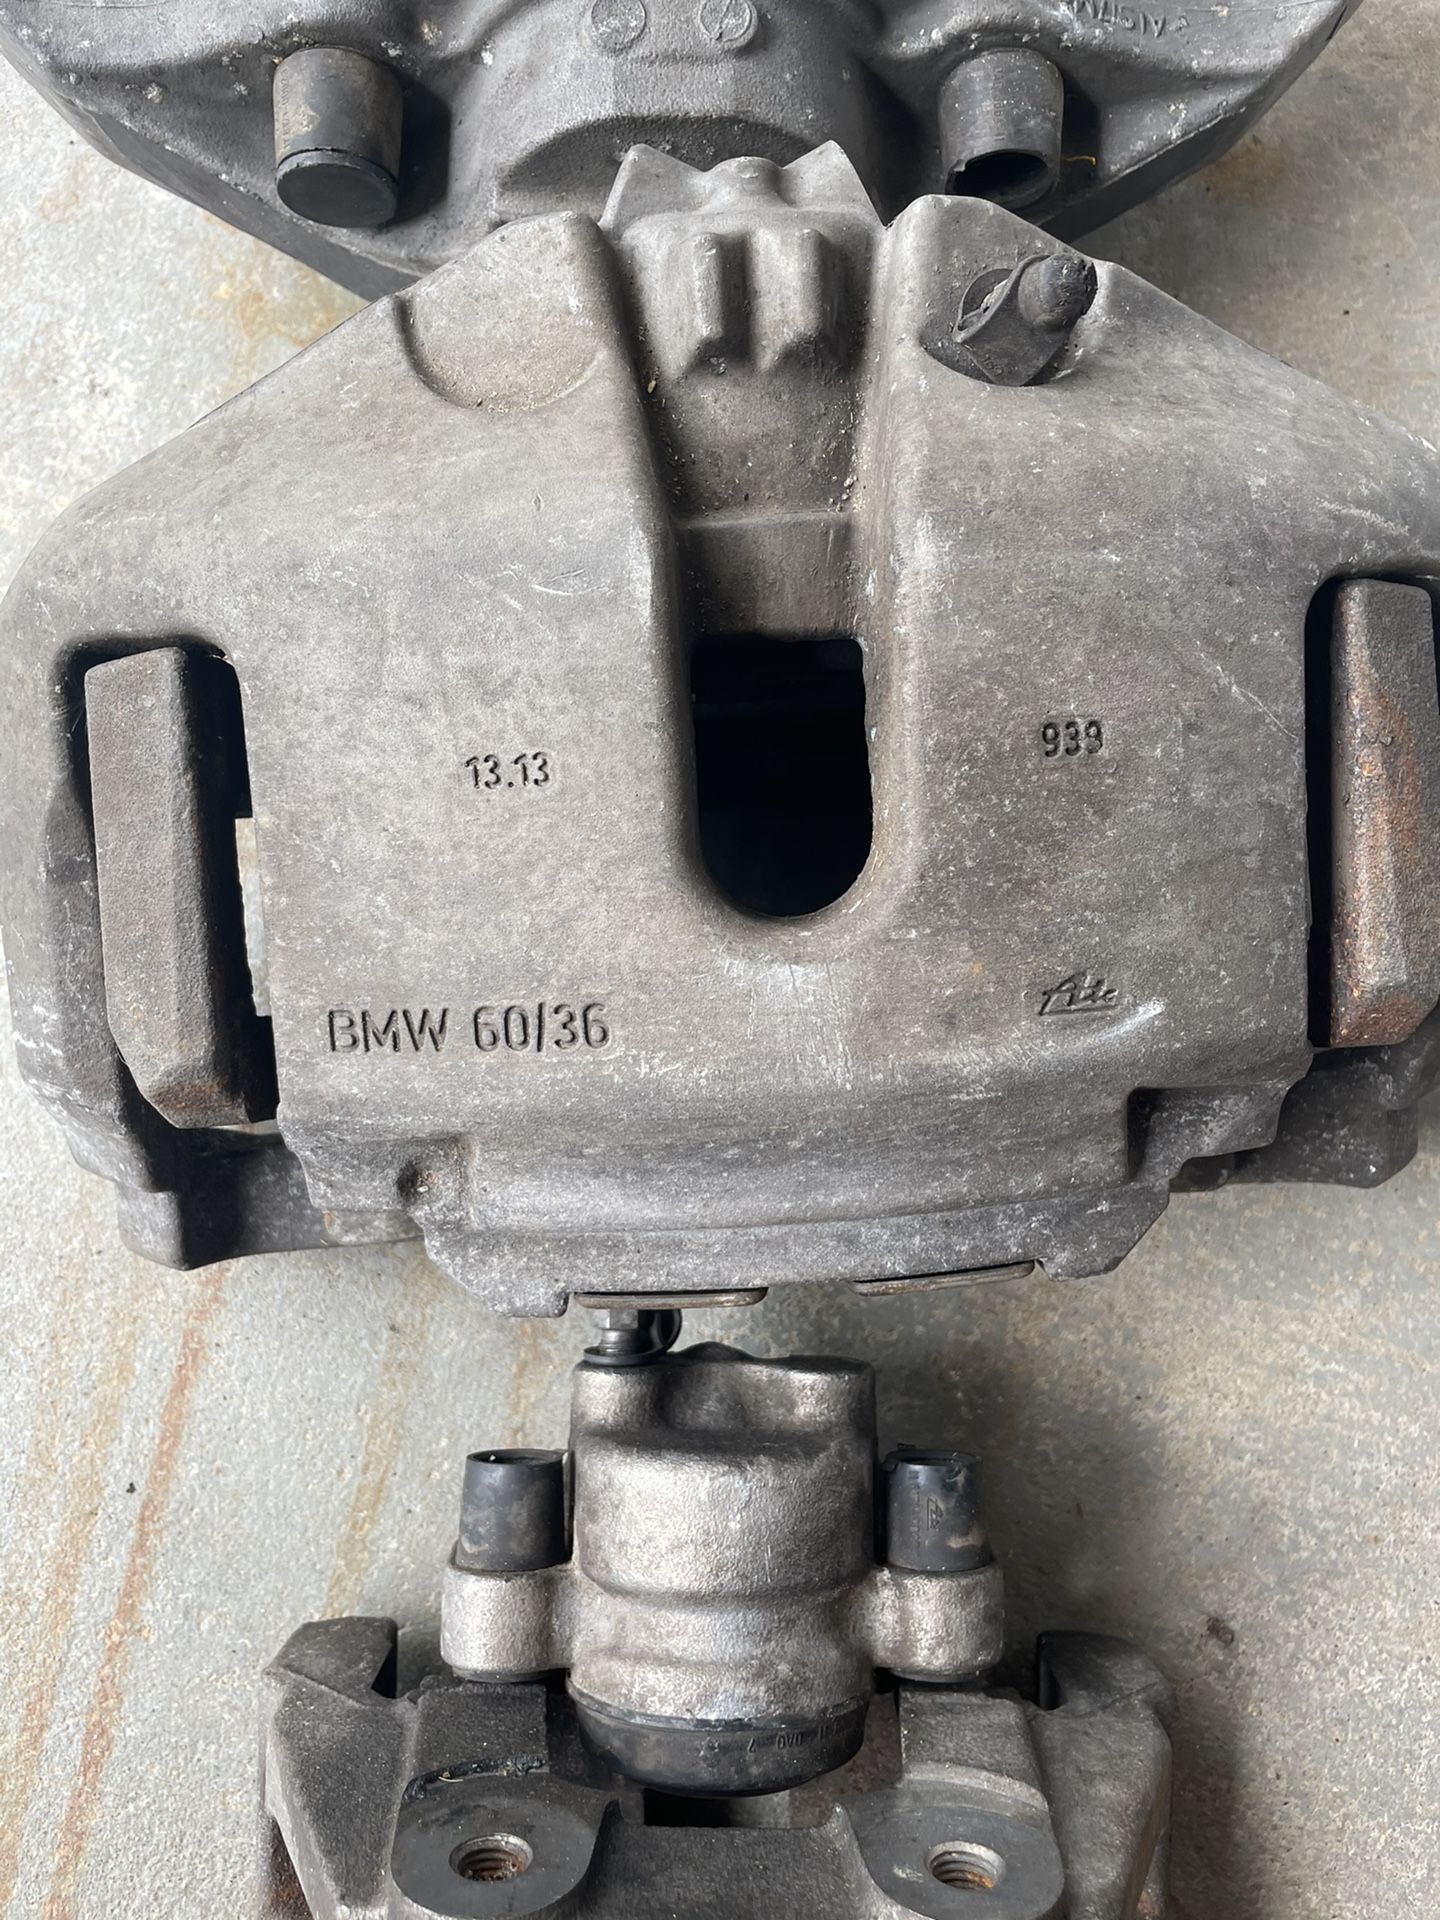 BMW 715li M 2013 Front and back brakes 